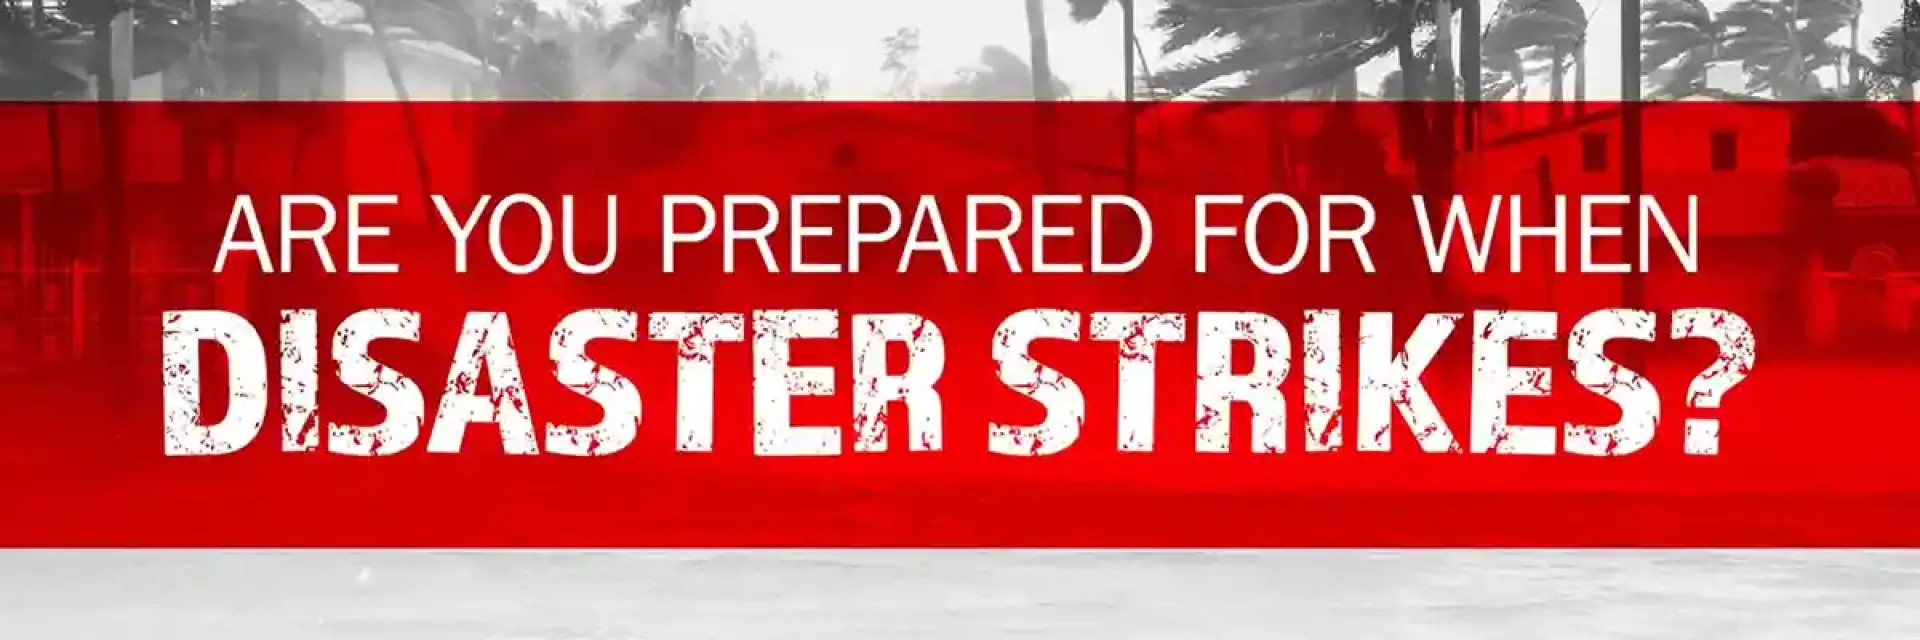 Are You Prepared For Disaster?